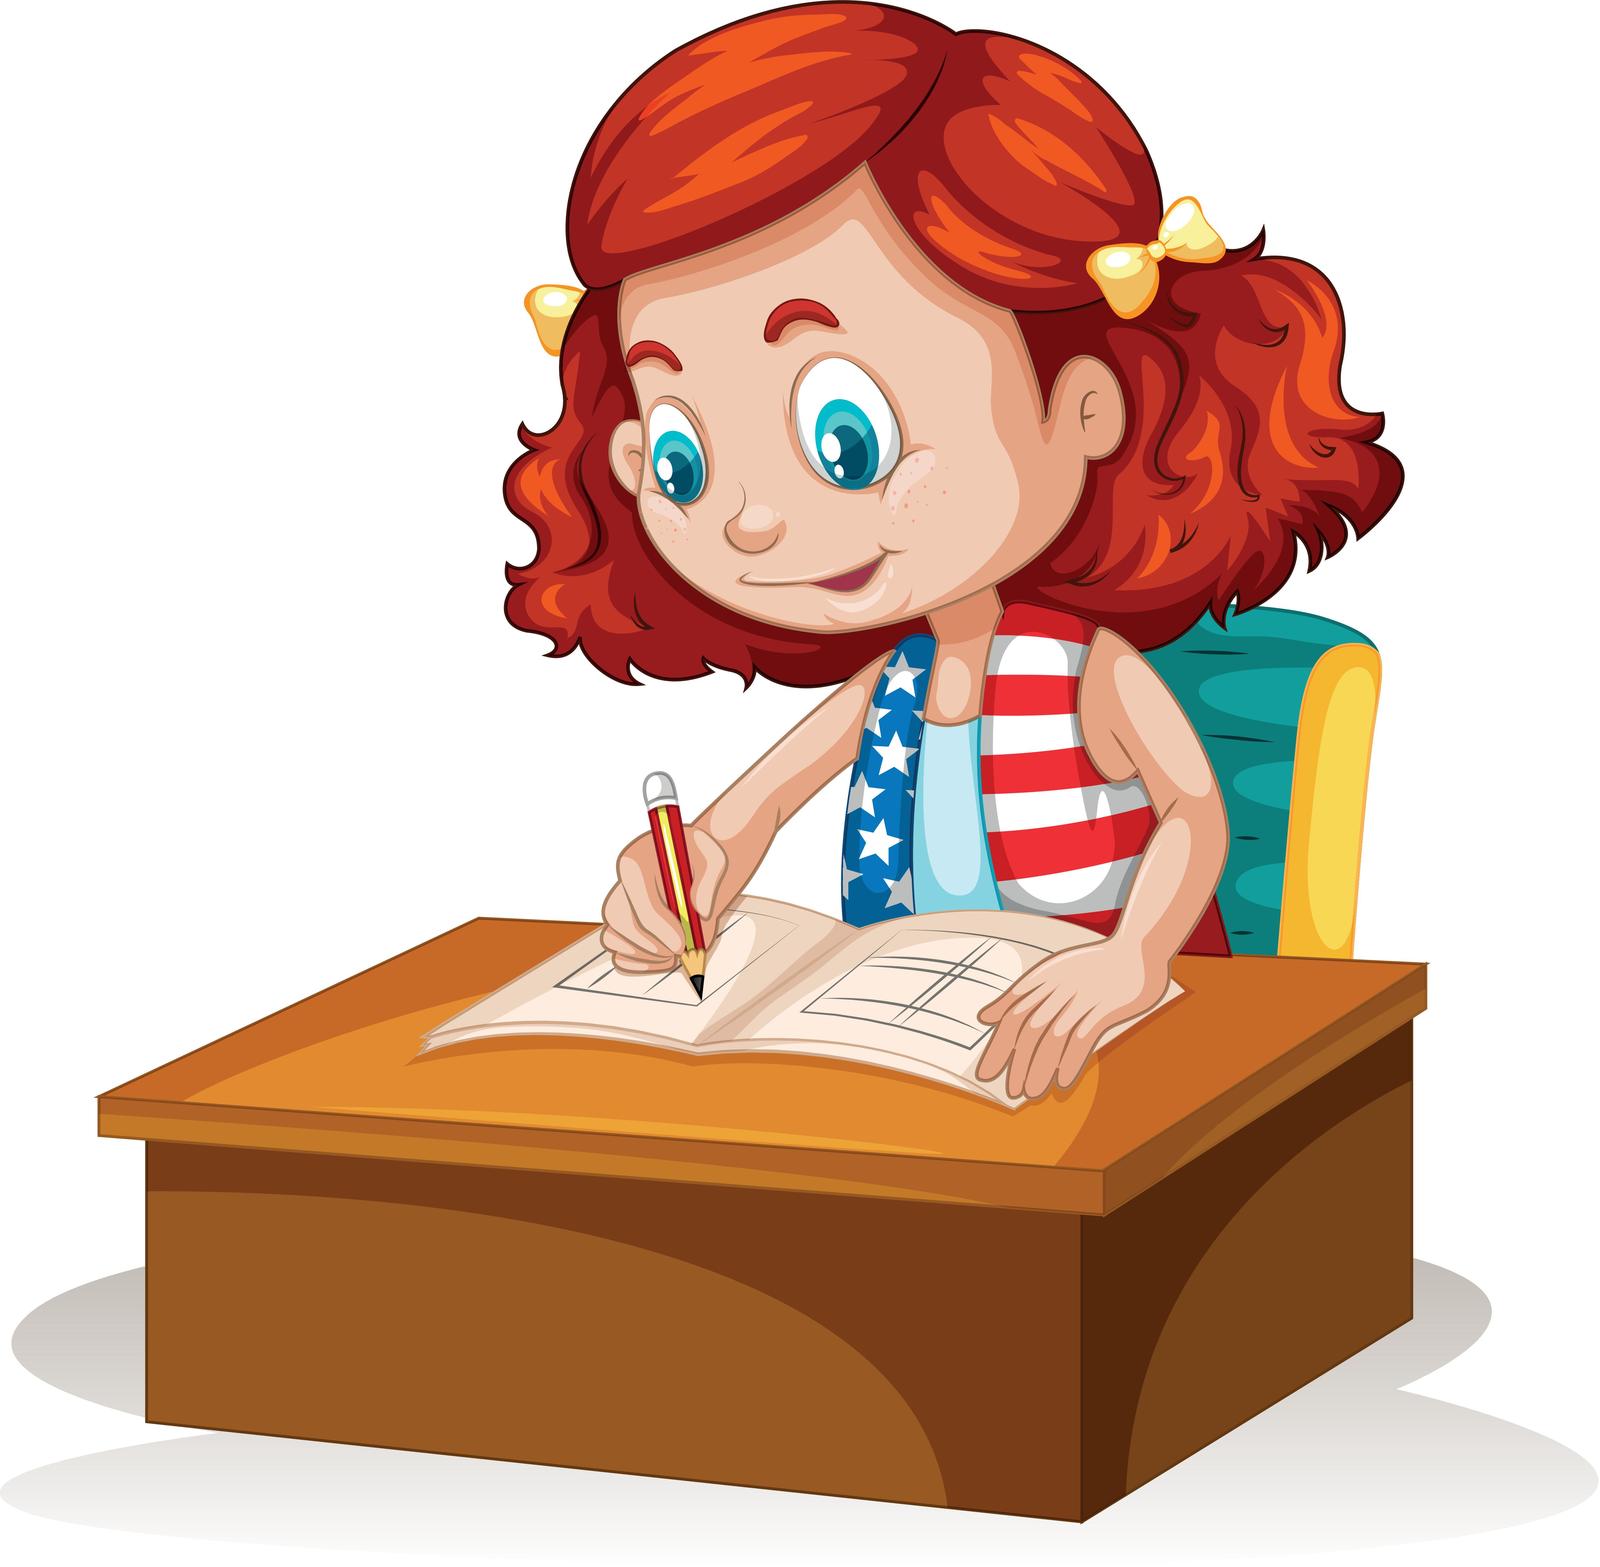 image of a girl writing